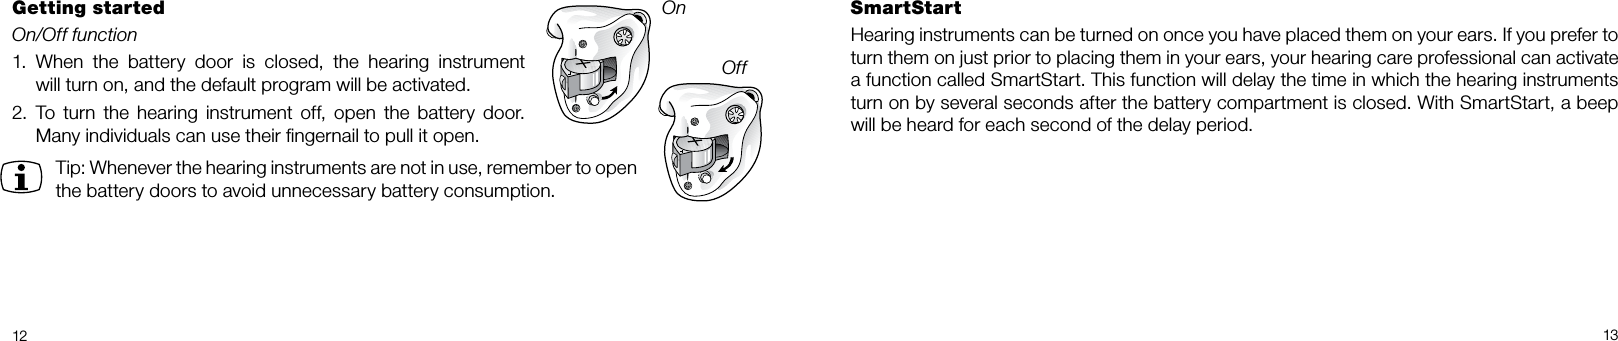 12 13SmartStartHearing instruments can be turned on once you have placed them on your ears. If you prefer to turn them on just prior to placing them in your ears, your hearing care professional can activate a function called SmartStart. This function will delay the time in which the hearing instruments turn on by several seconds after the battery compartment is closed. With SmartStart, a beep will be heard for each second of the delay period.Getting startedOn/Off function1.  When  the  battery  door  is  closed,  the  hearing  instrument  will turn on, and the default program will be activated. 2.   To  turn the hearing  instrument  off,  open  the  battery door. Many individuals can use their ﬁngernail to pull it open.Tip: Whenever the hearing instruments are not in use, remember to open the battery doors to avoid unnecessary battery consumption.OnOff